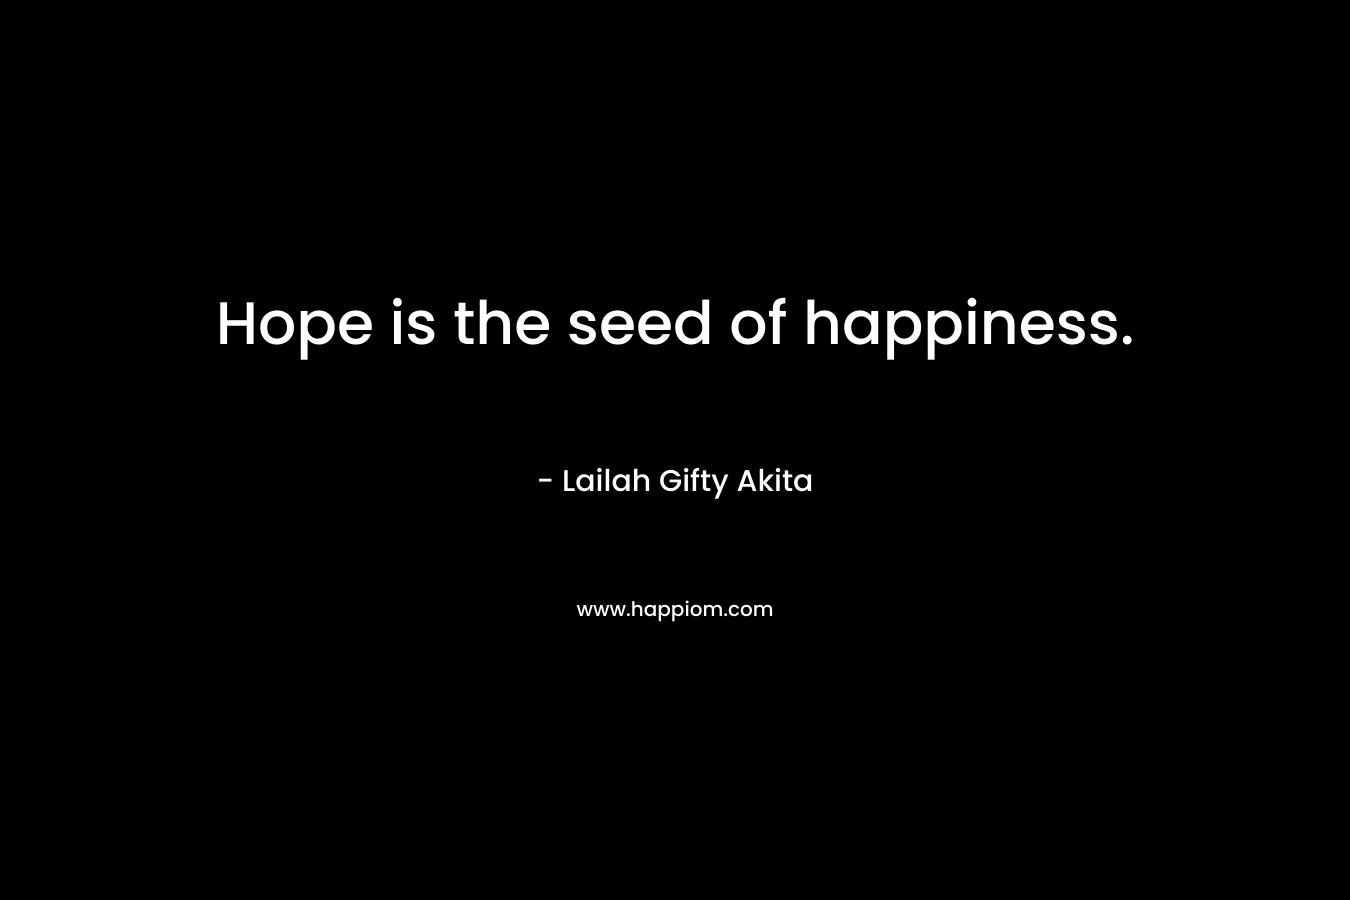 Hope is the seed of happiness.